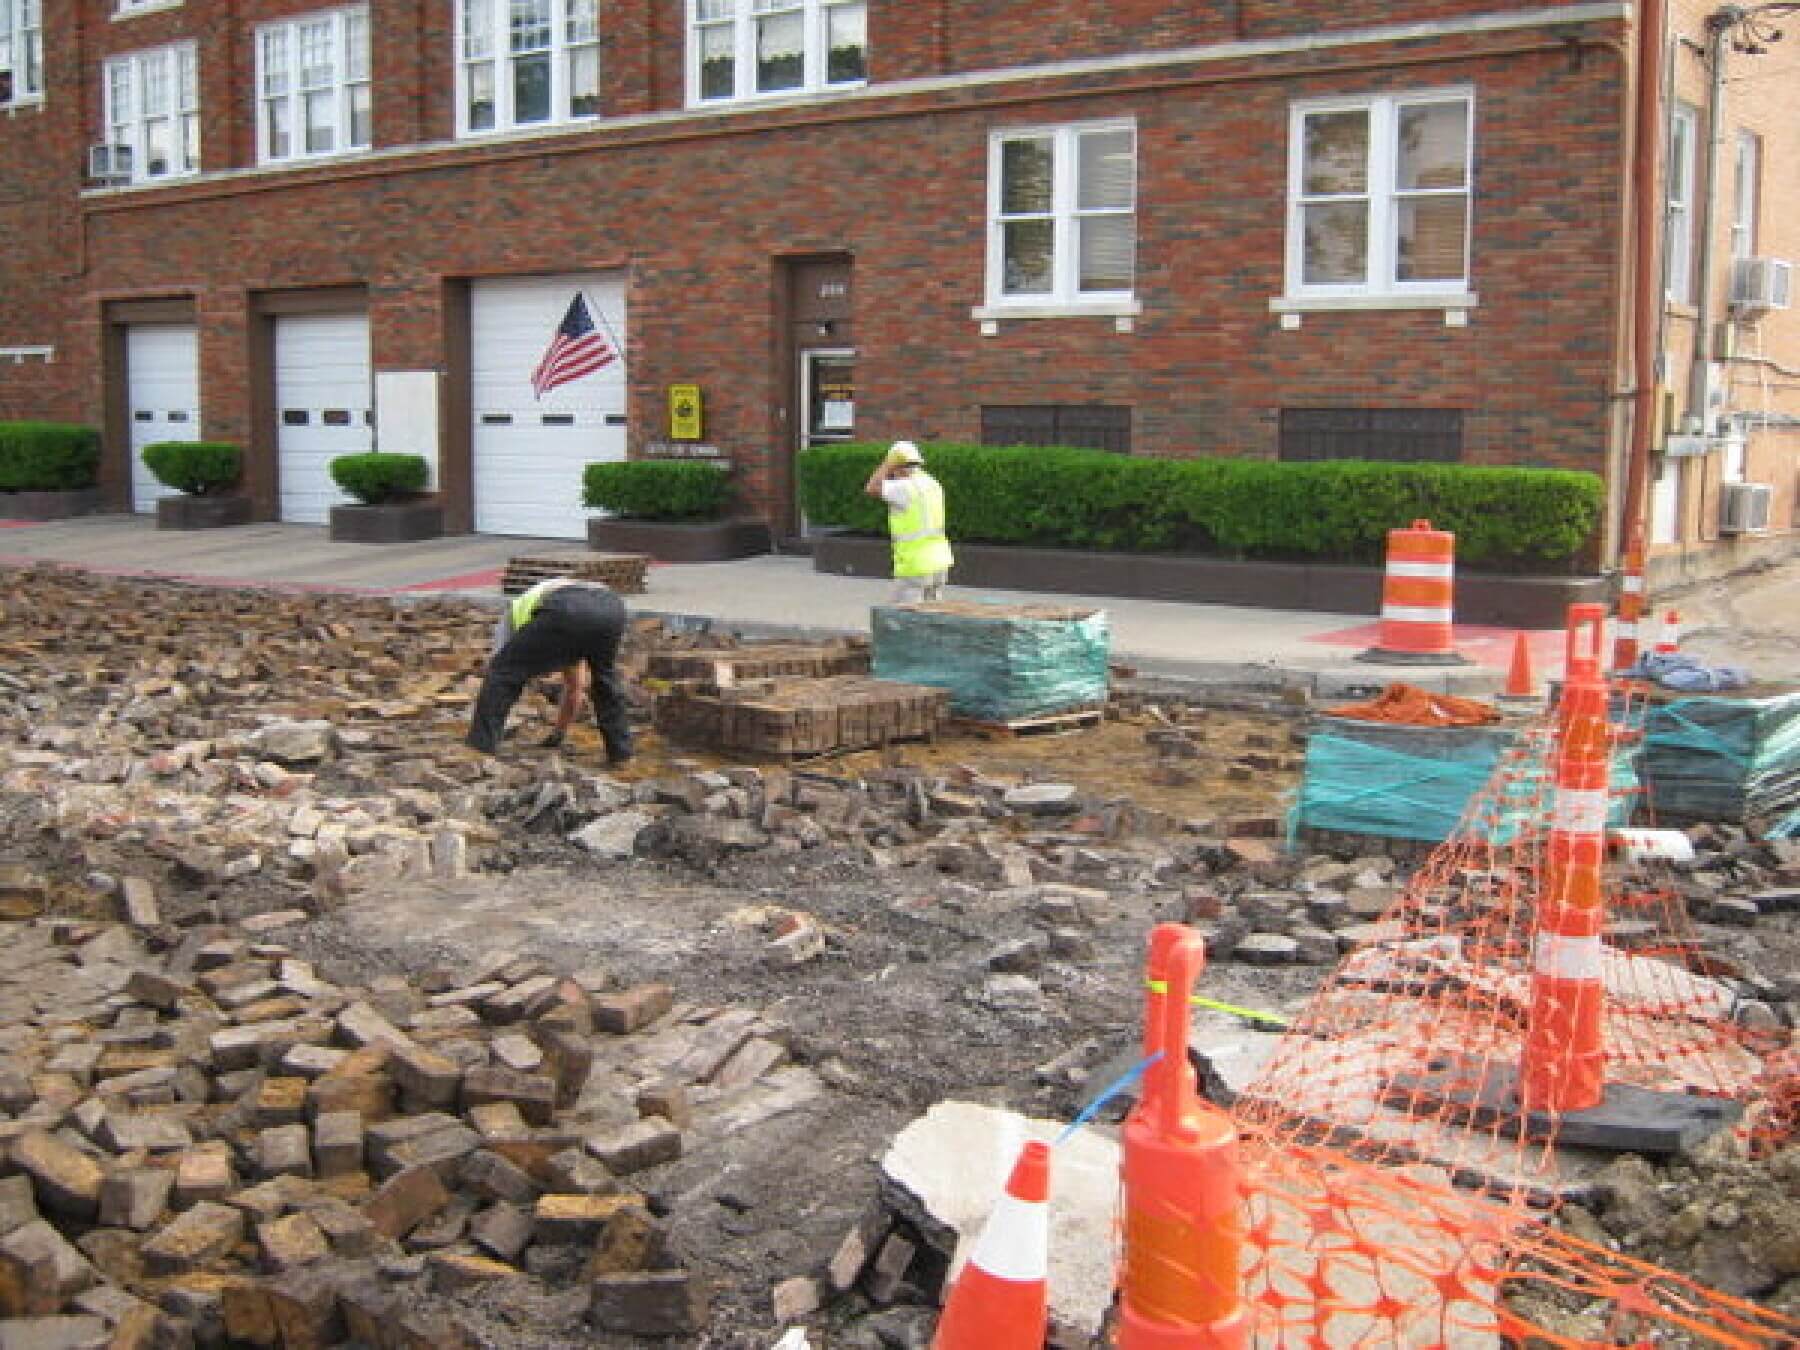 A construction site with cones and workers in downtown Ennis